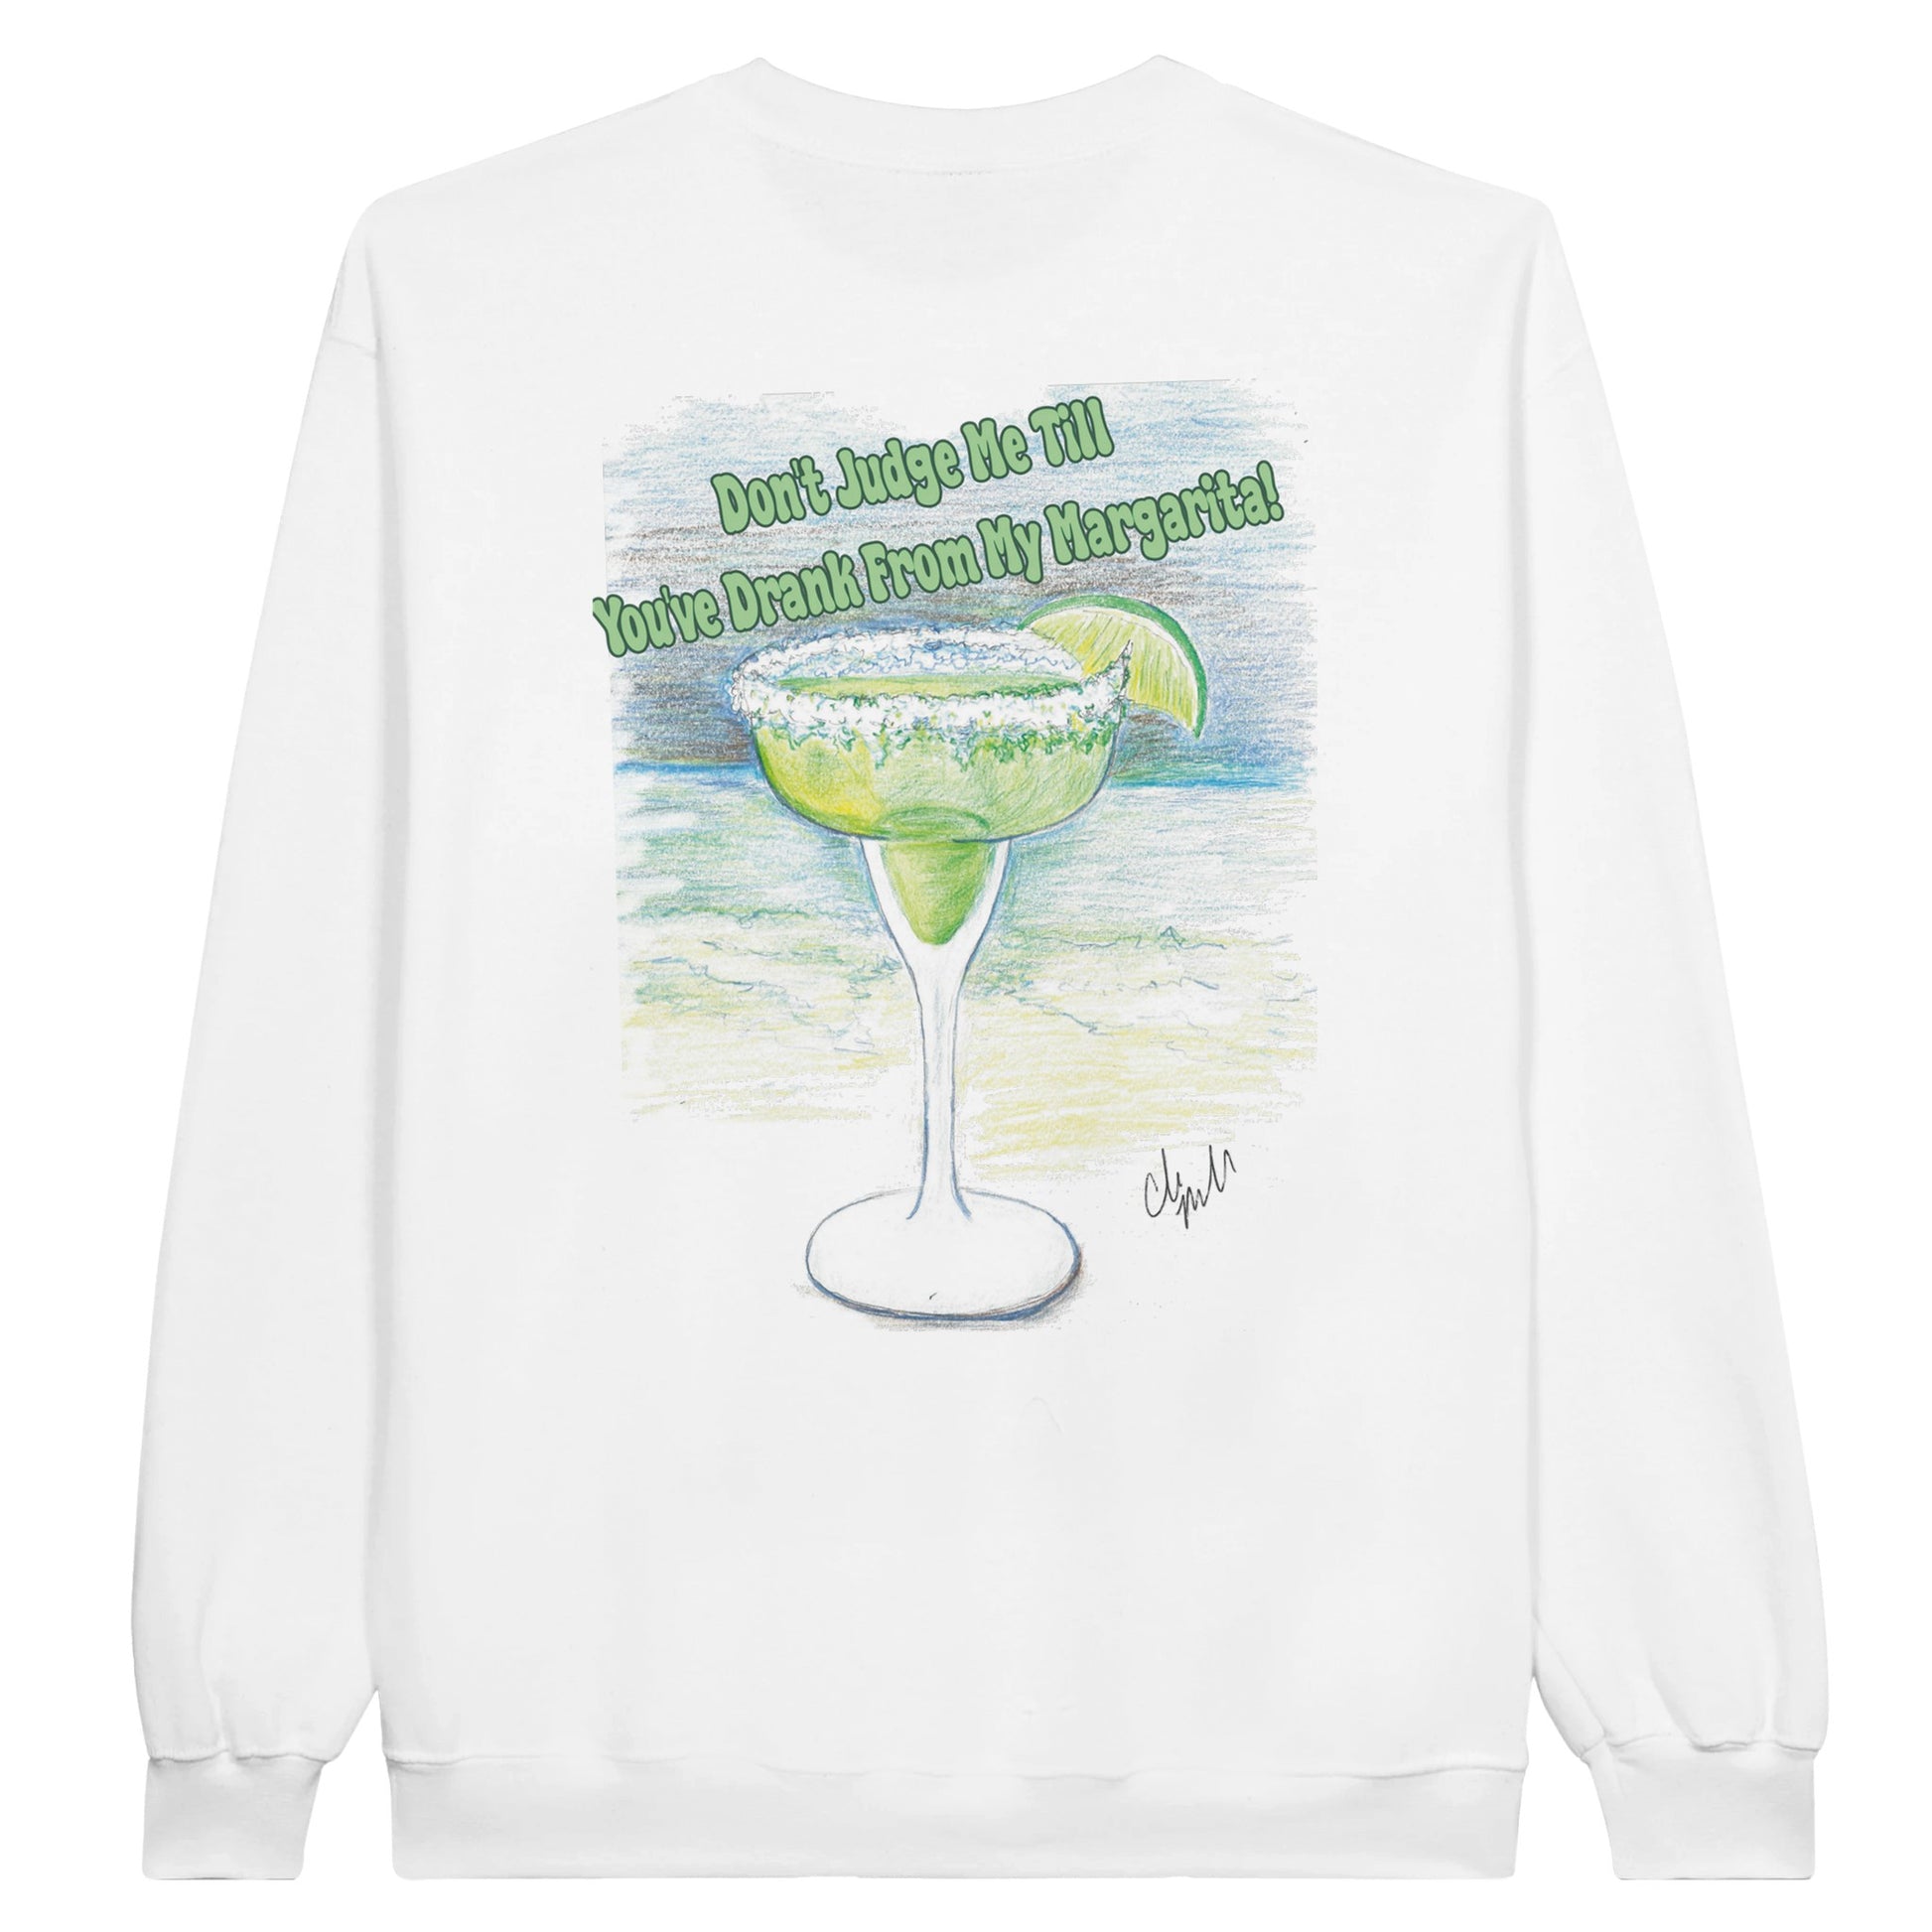 A white Classic Unisex Crewneck sweatshirt with original artwork and motto Don’t Judge Me Till You’ve Drank From My Margarita on back and Whatya Say logo on front from WhatYa Say Apparel rear view lying down.